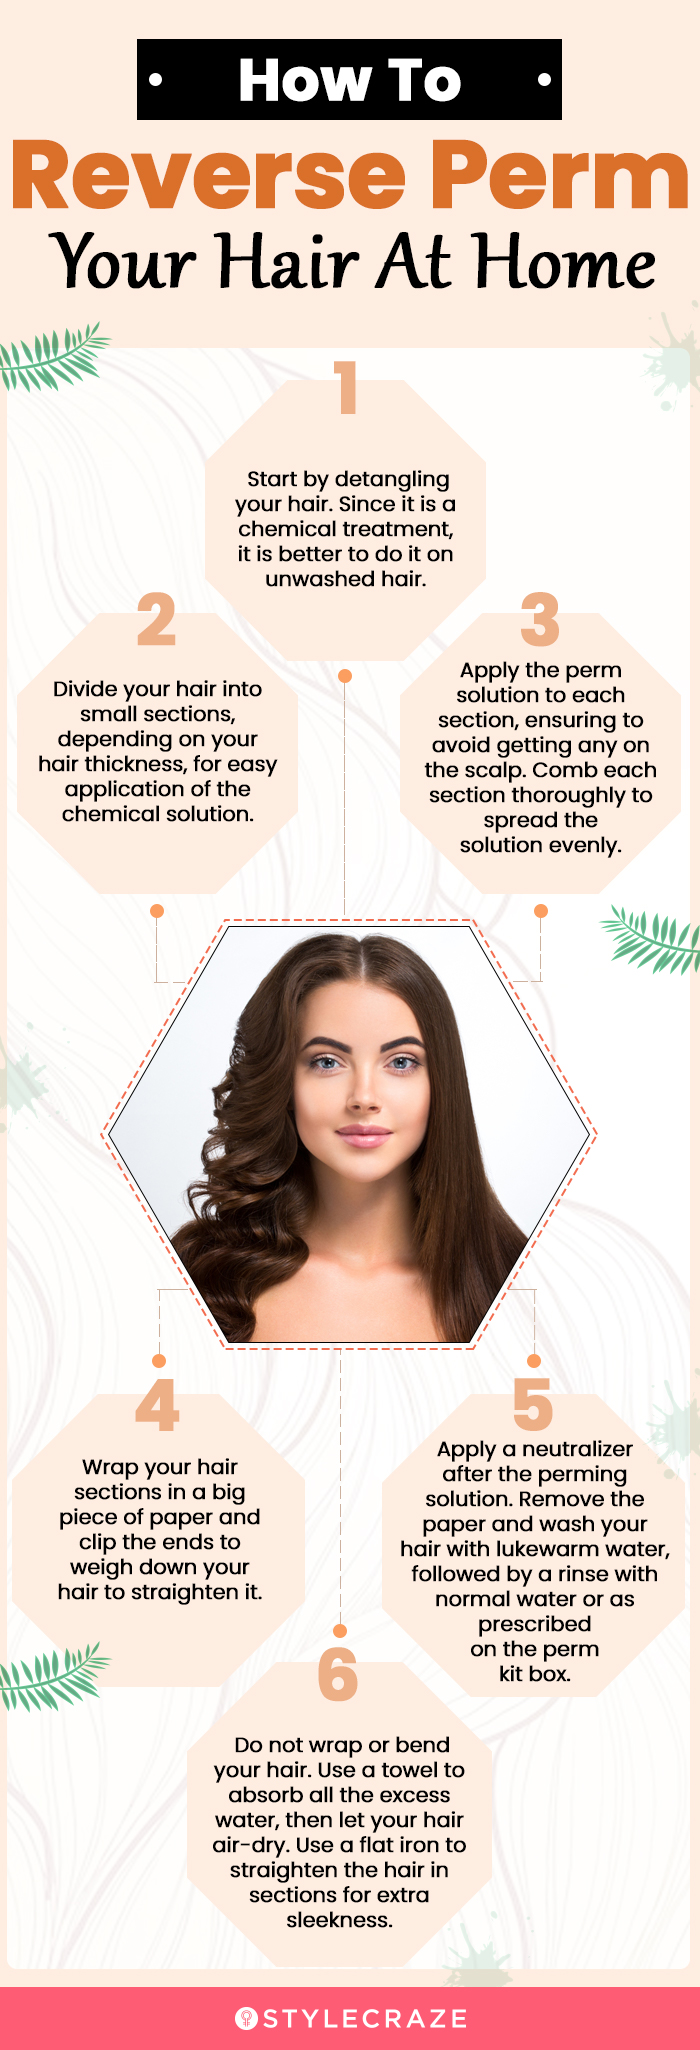 how to reverse perm your hair at home (infographic)